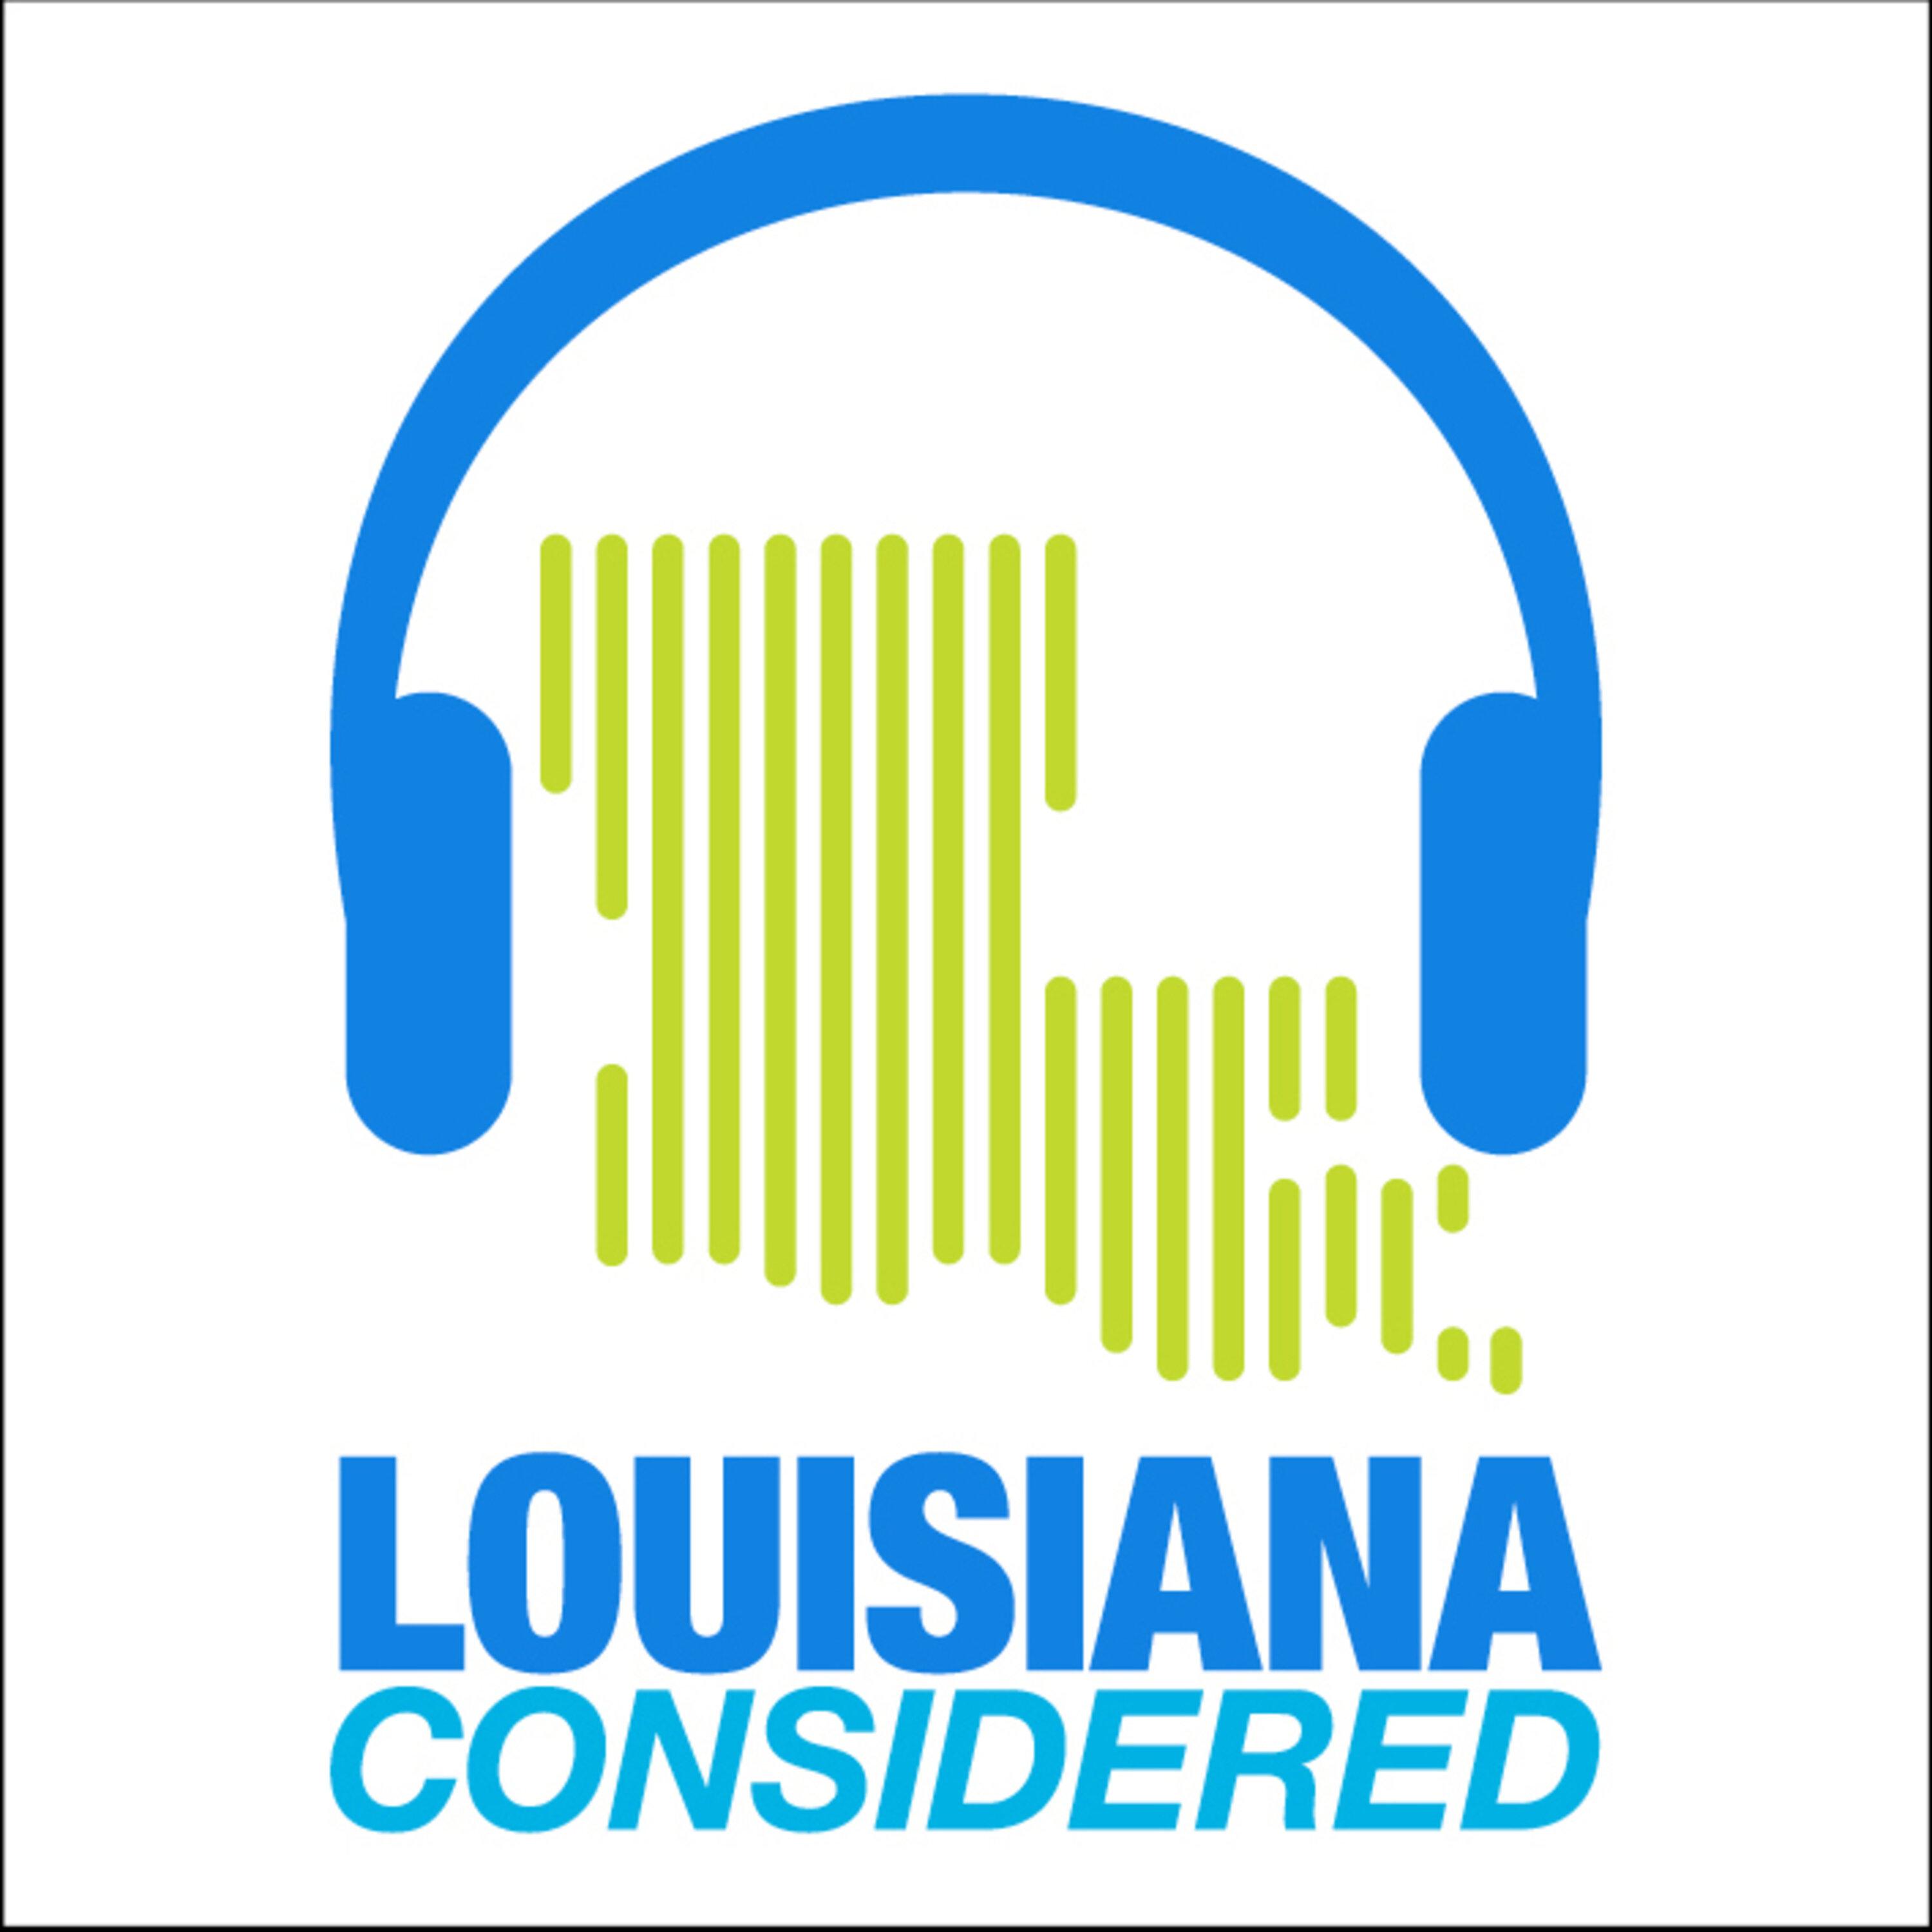 Thumbnail for "Louisiana Considered: State program will help resolve storm-related insurance disputes".